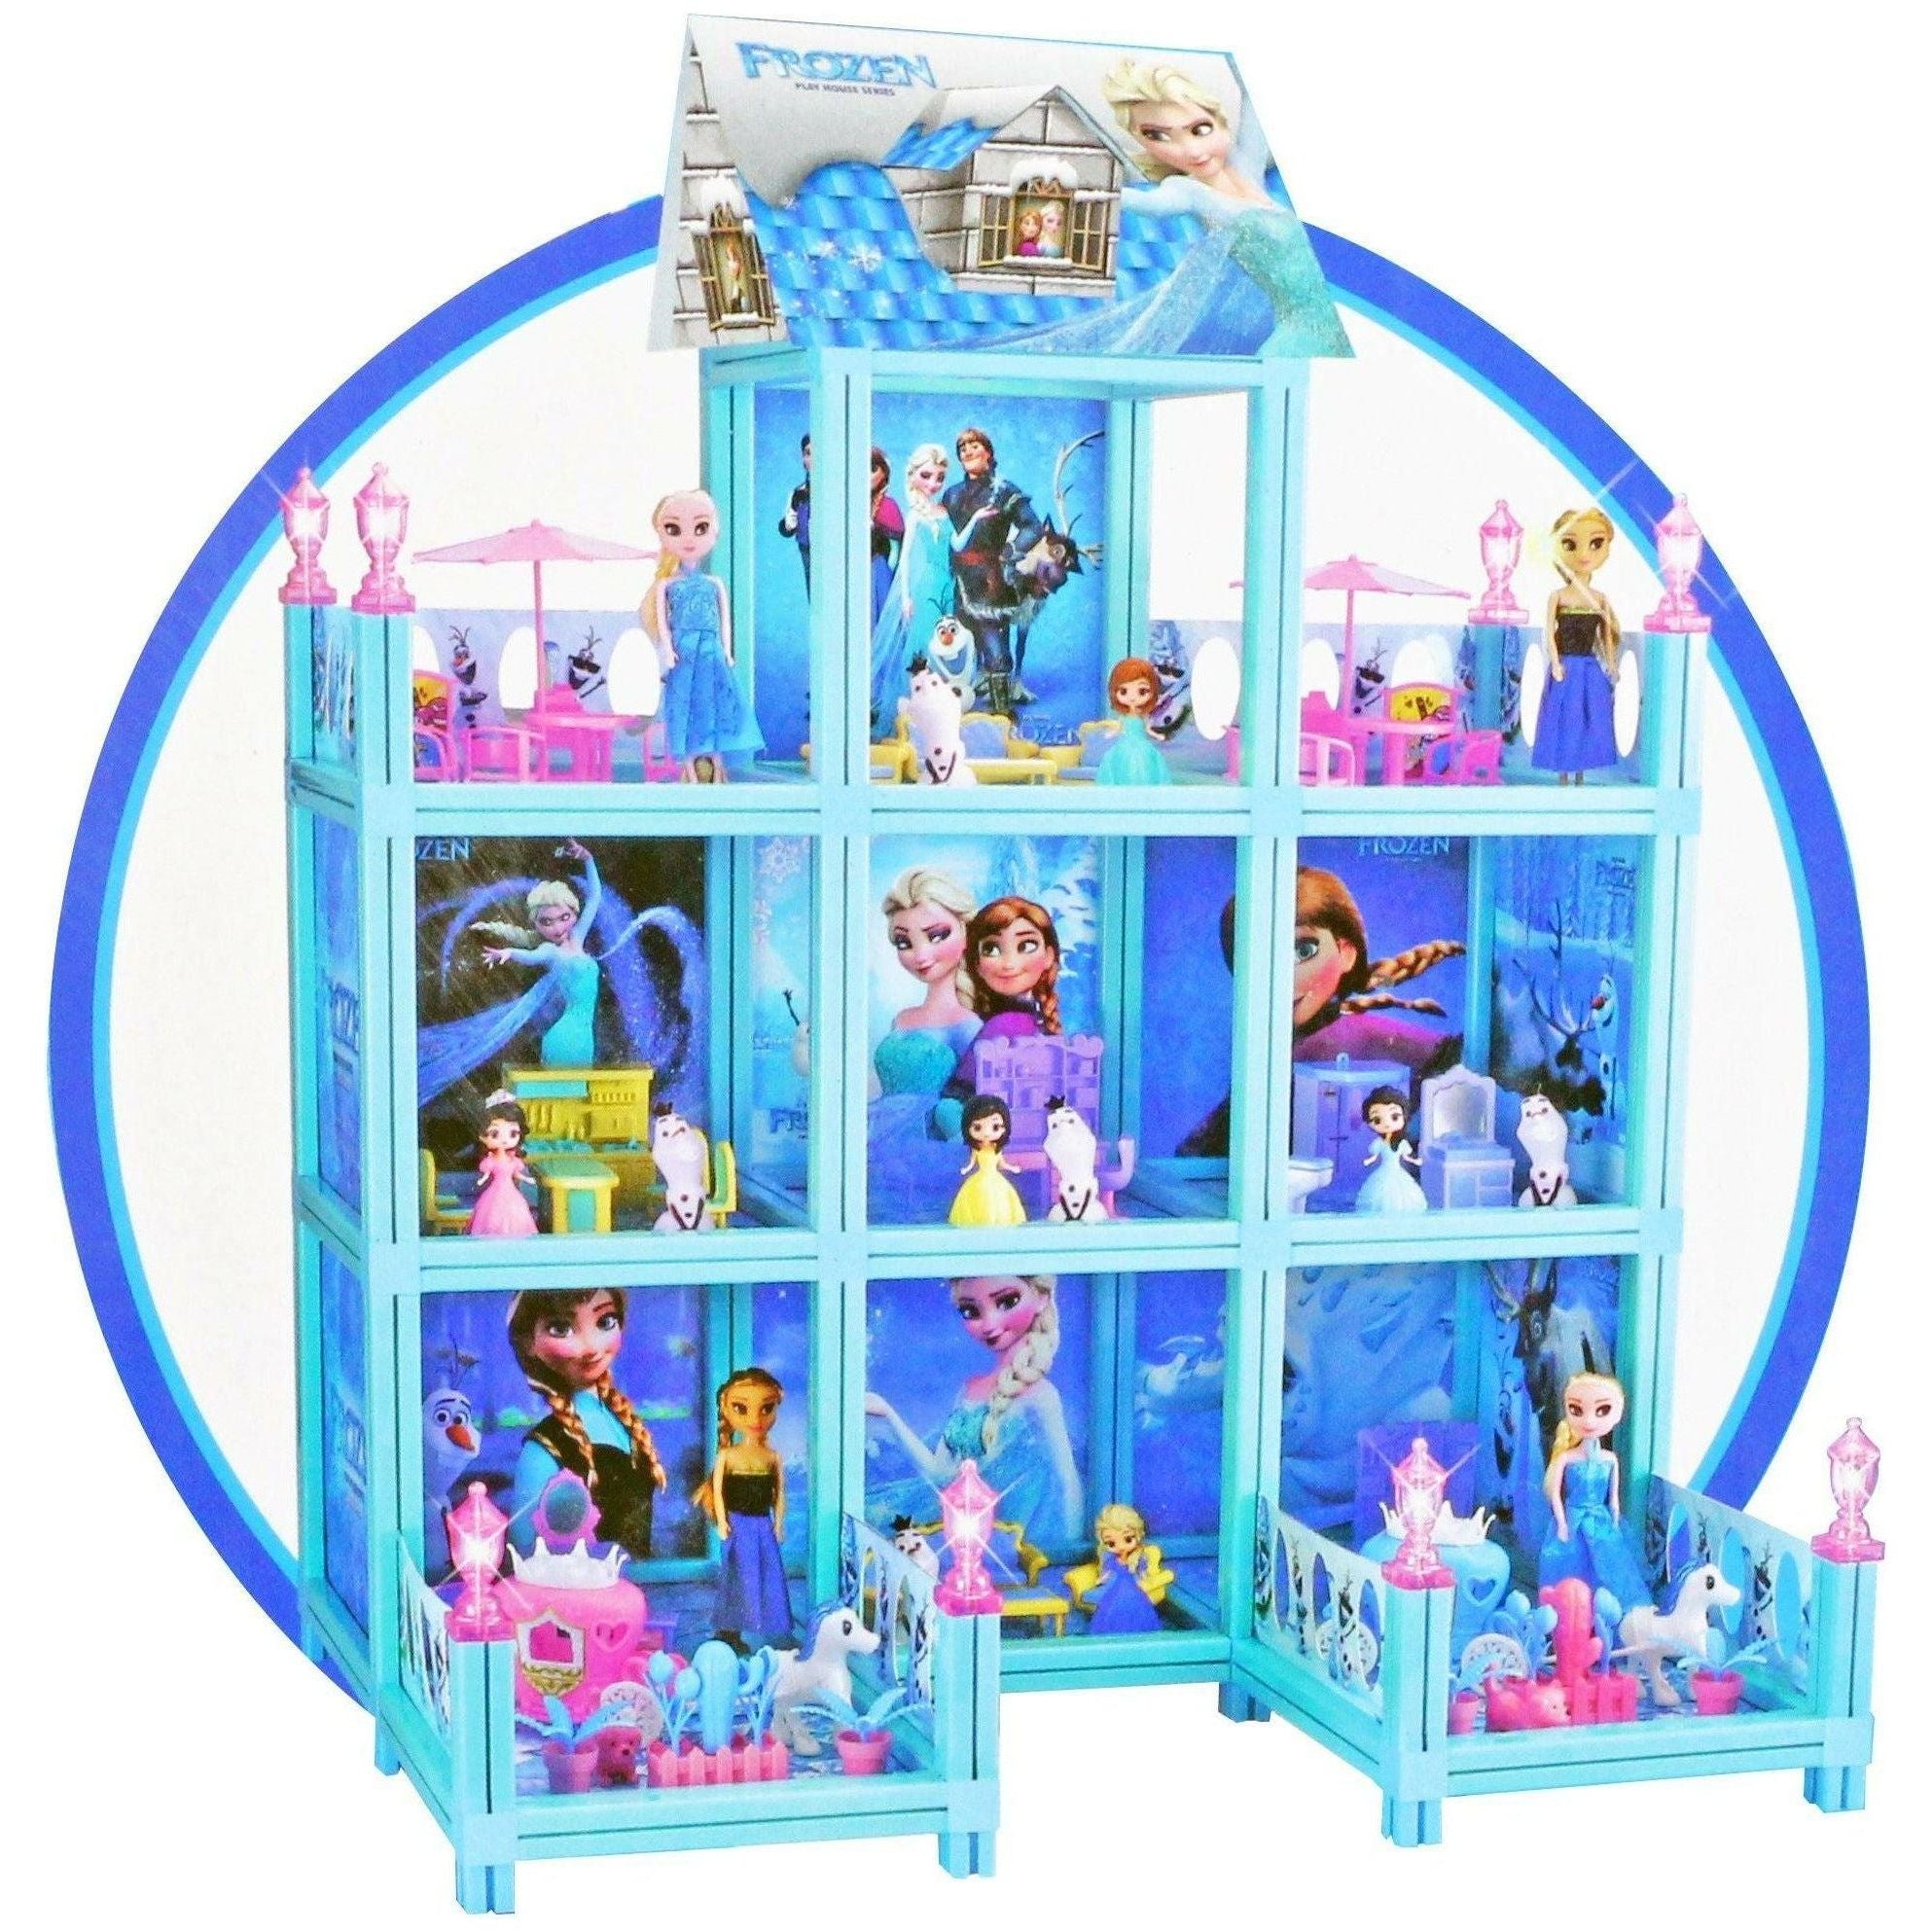 Frozen Doll House Play Set Model 8371 - BumbleToys - 5-7 Years, Doll House, Frozen, Girls, Pre-Order, Toy Land